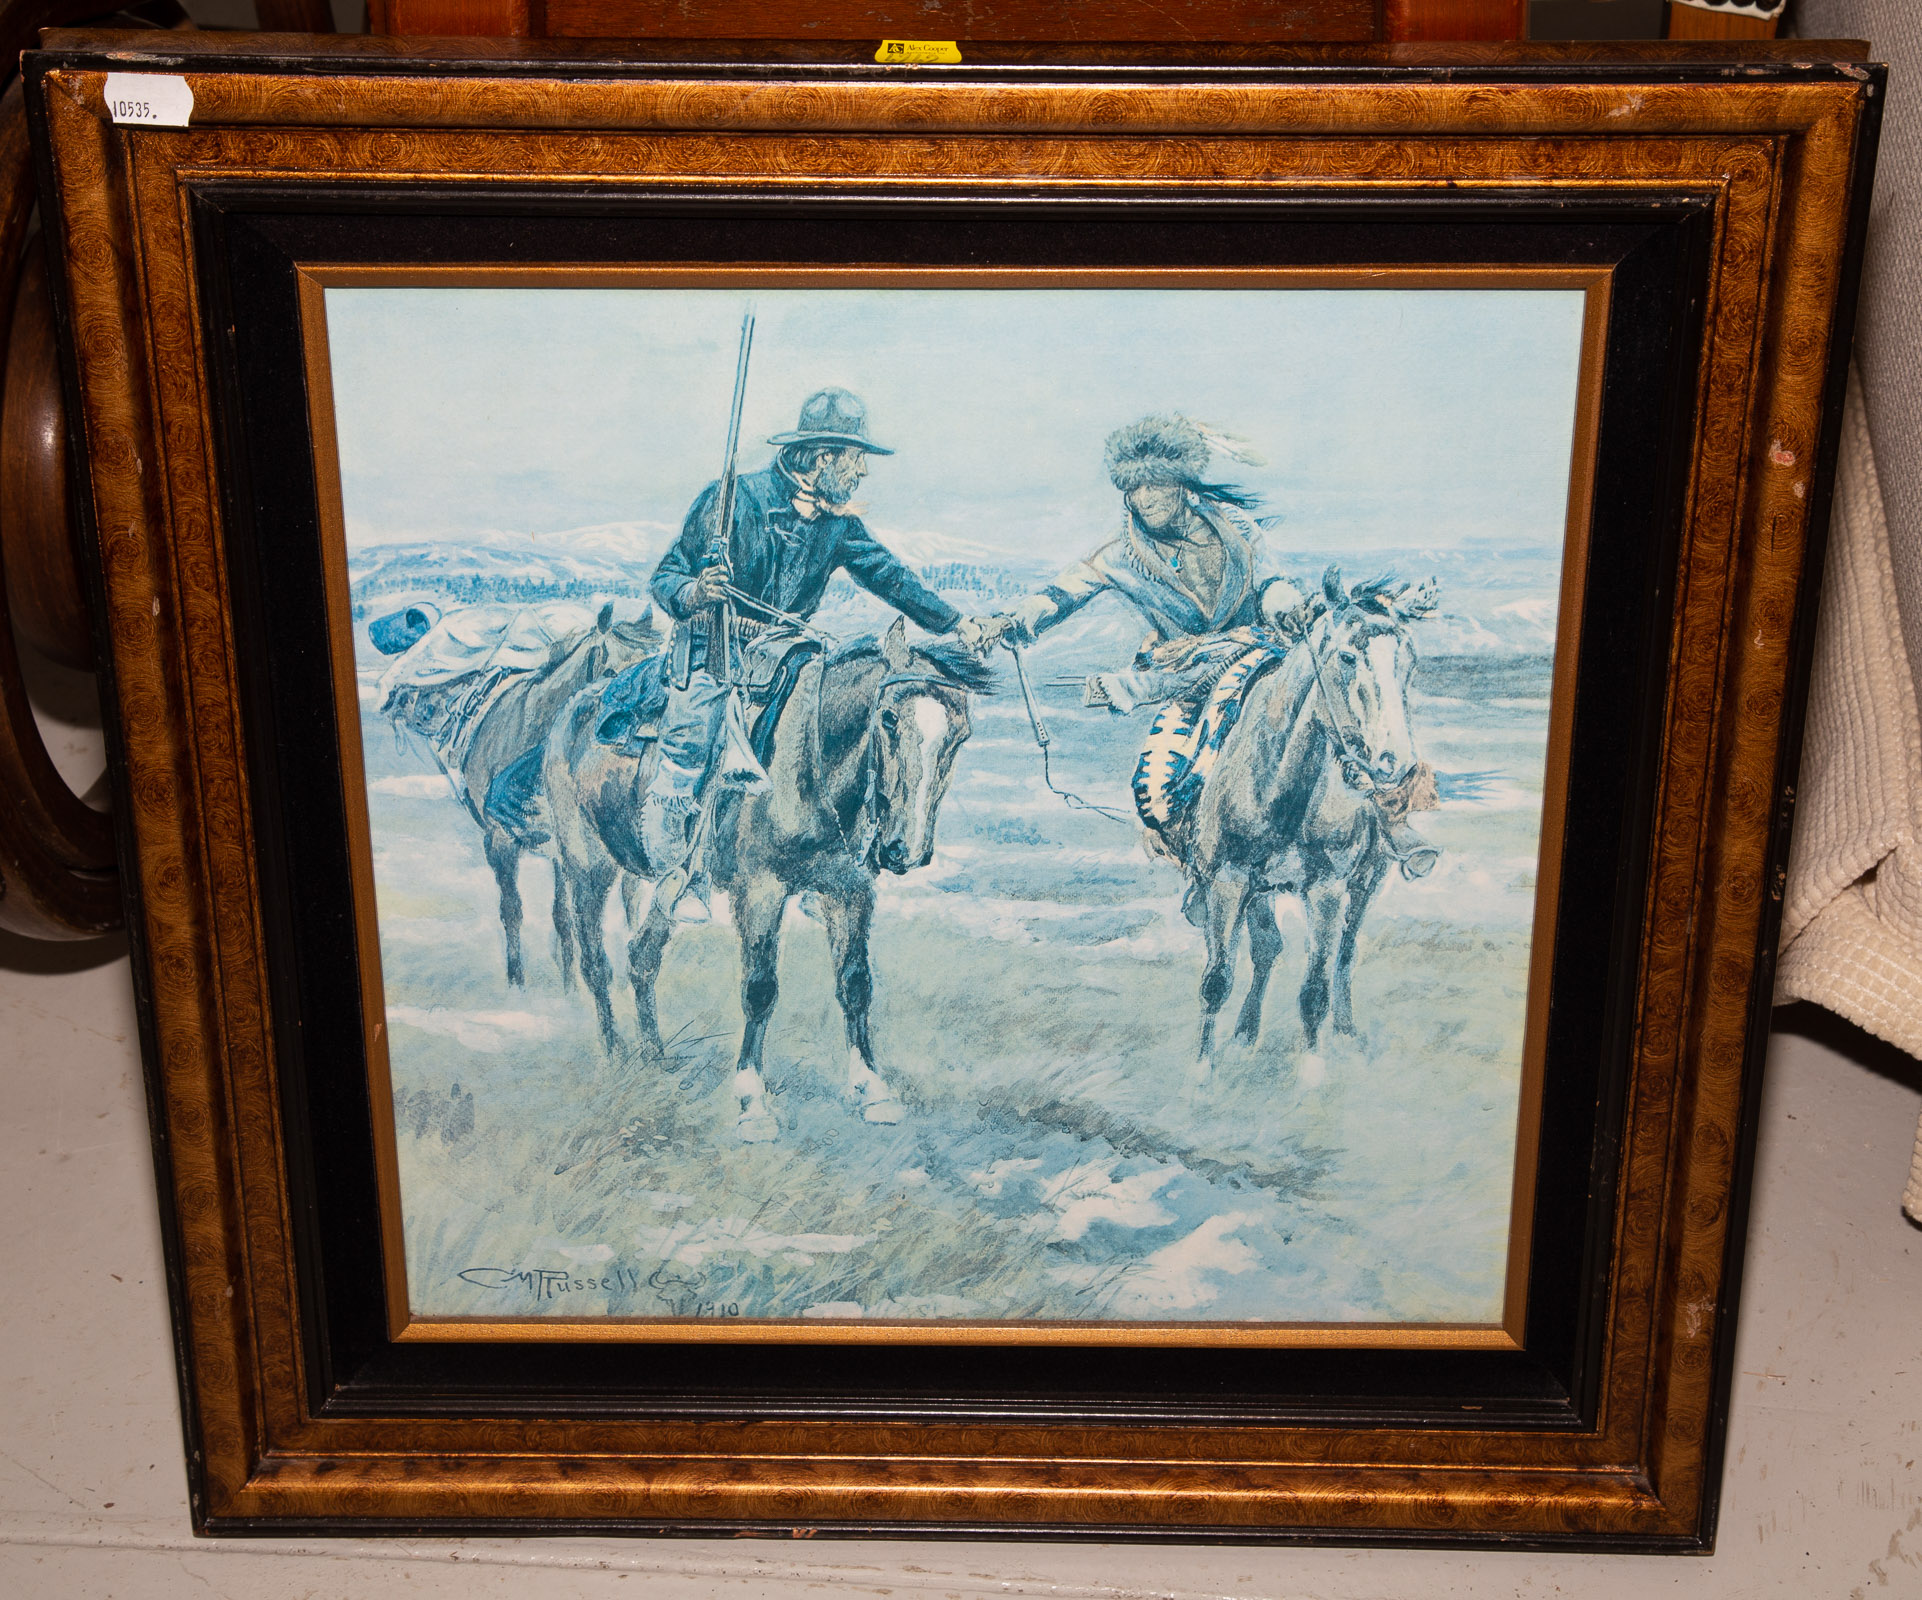 C.M.RUSSELL. FRAMED ARTWORK Sight size